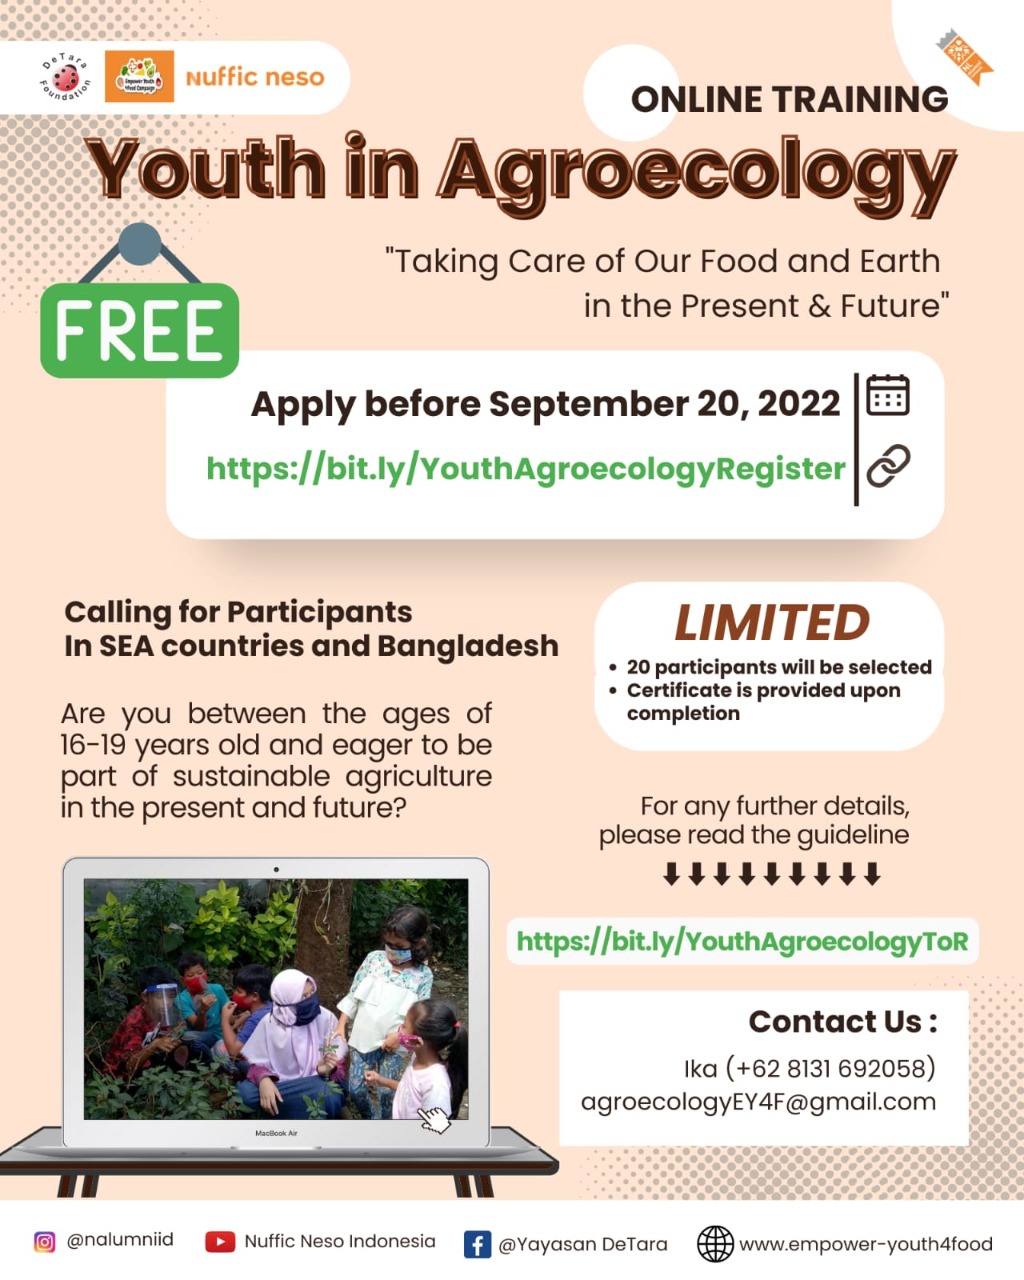 Youth in Agroecology Event Invitation